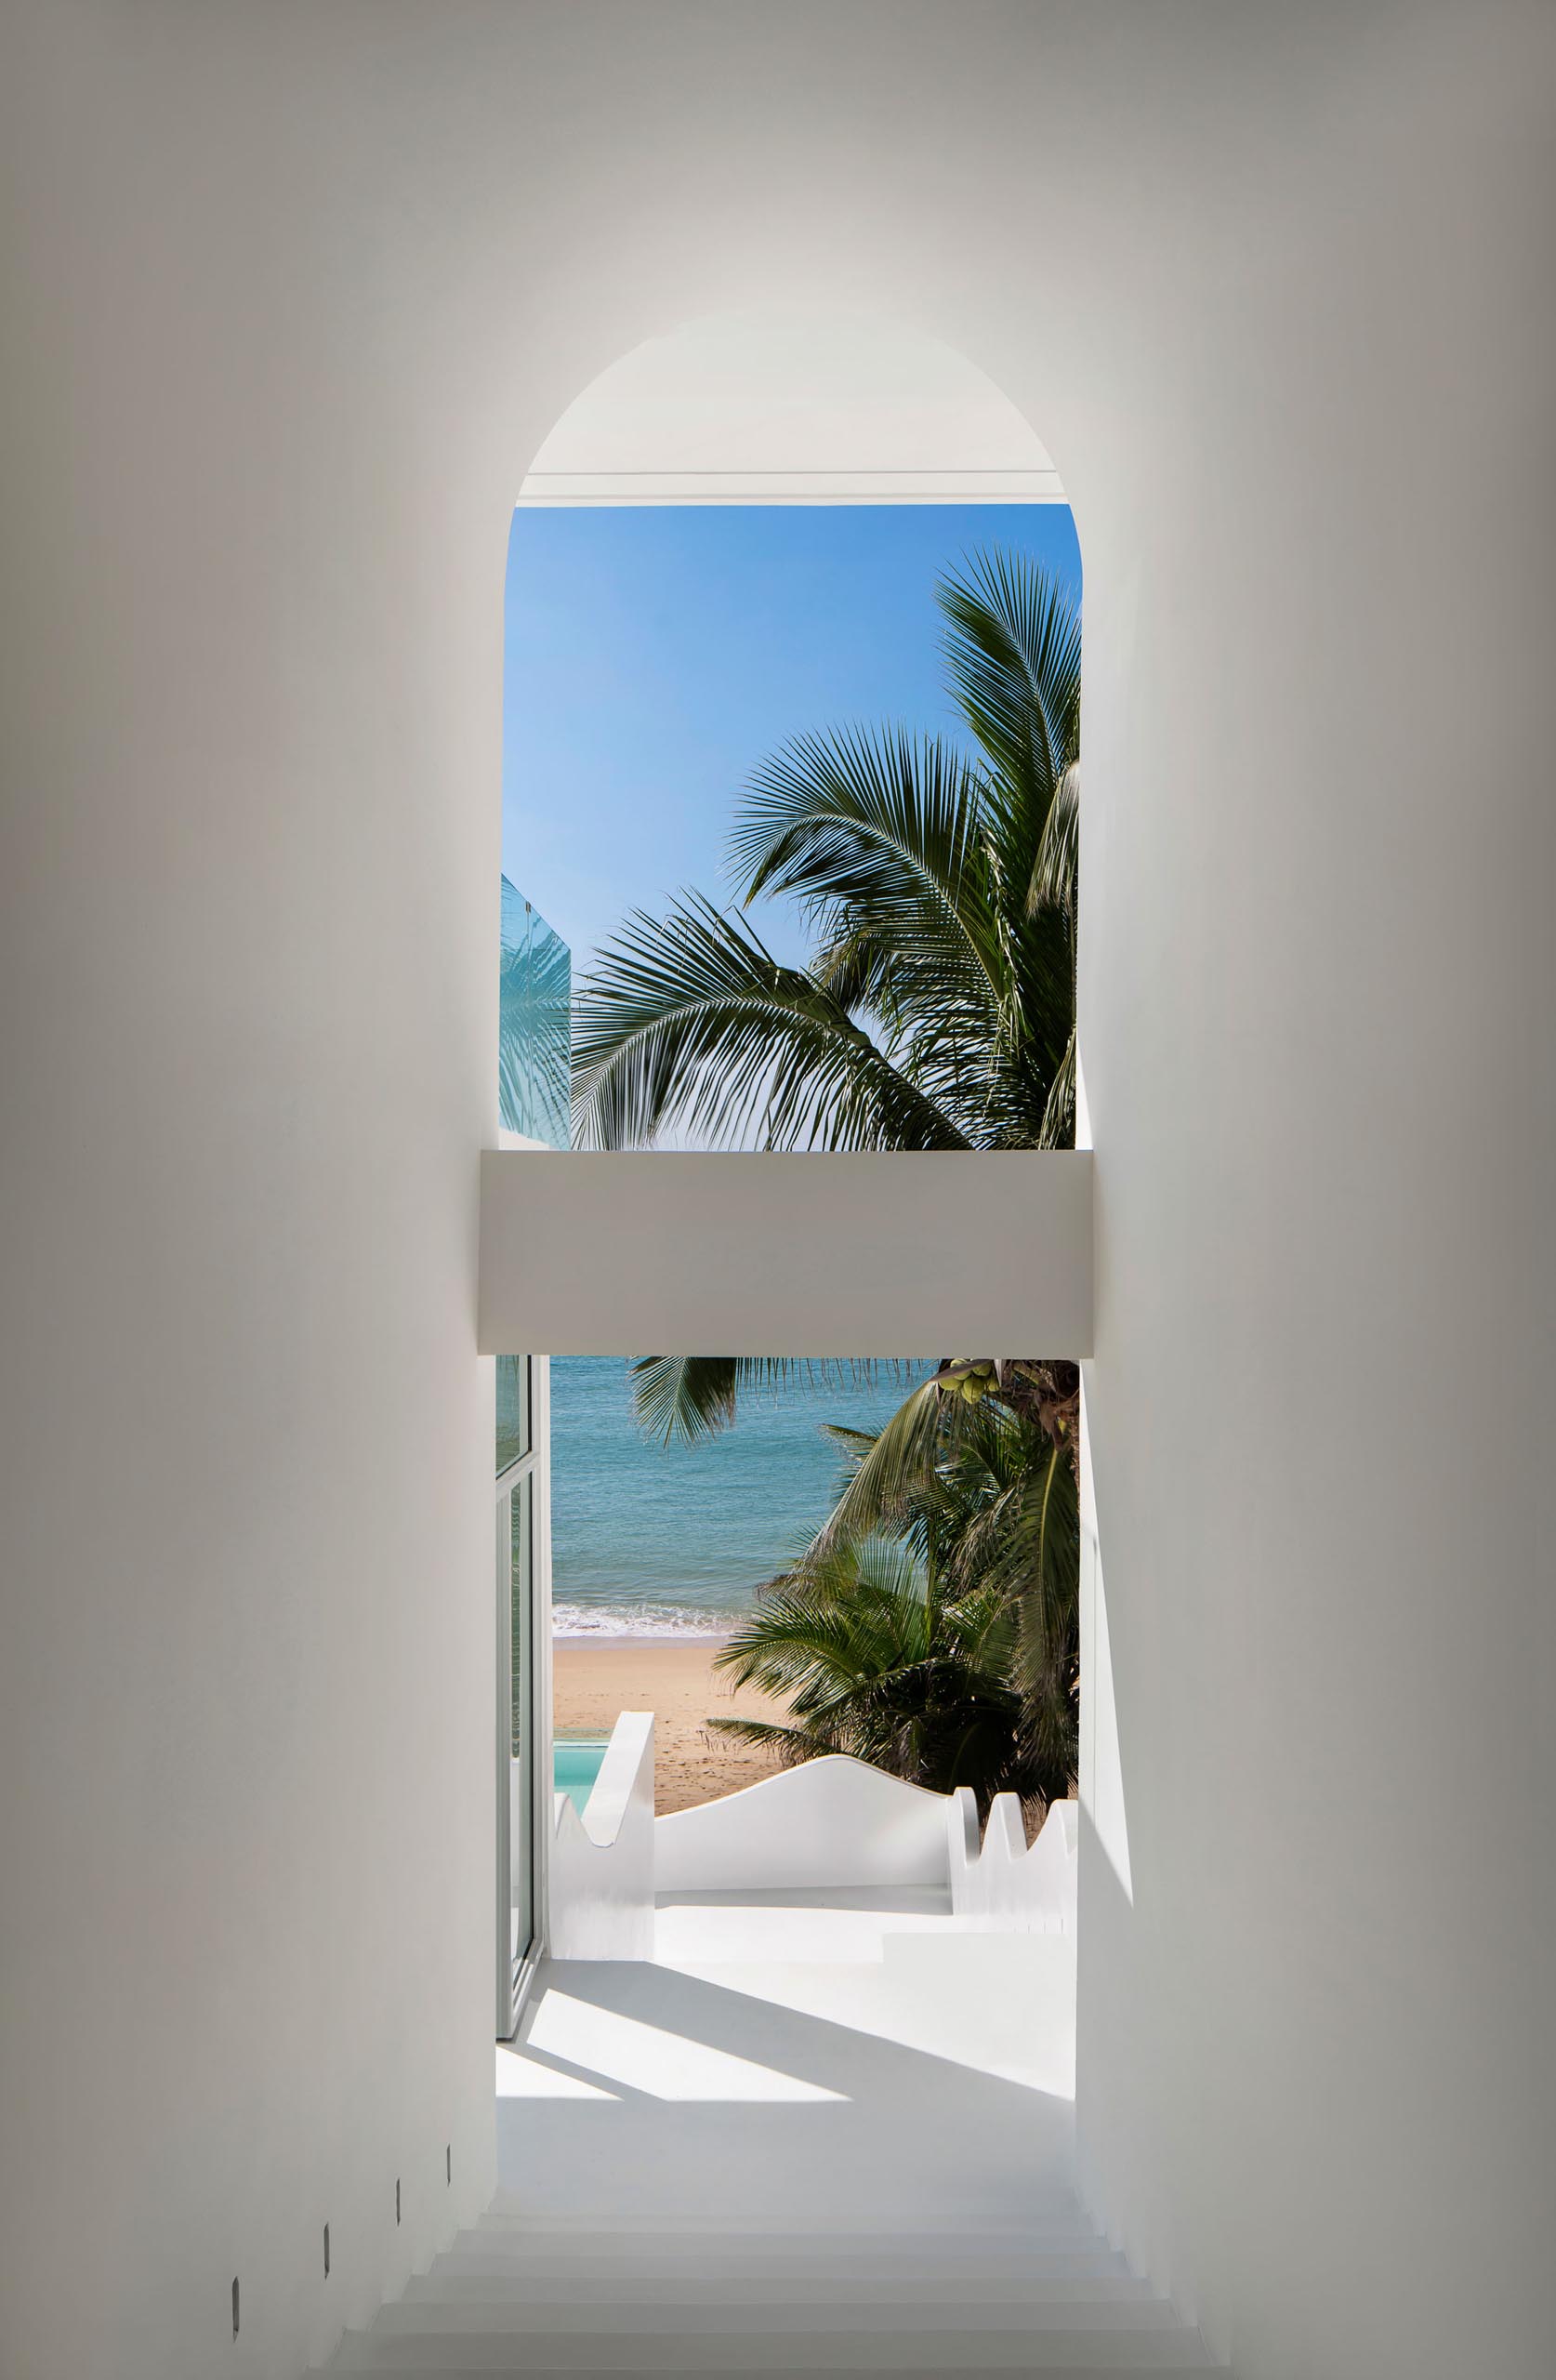 A modern hotel hallway with views of the beach.